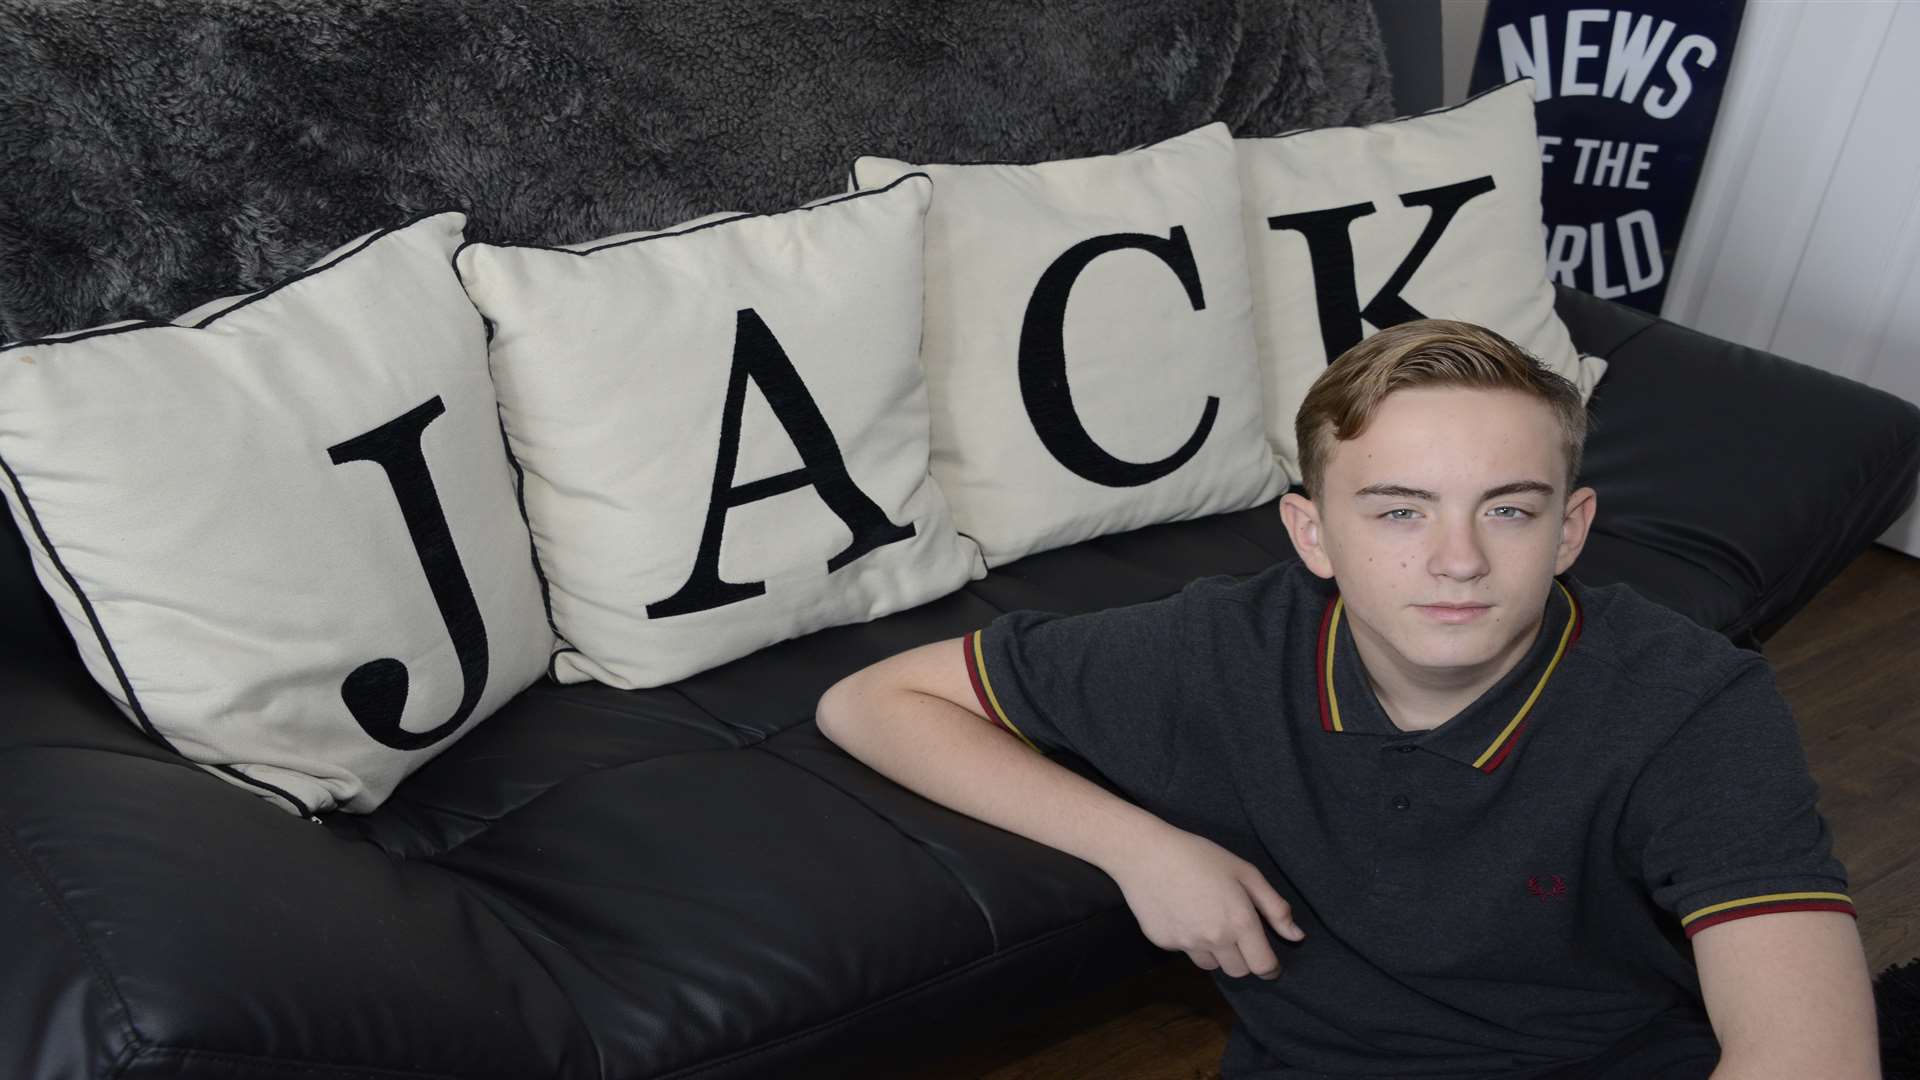 Jack Rose has just relased his new single